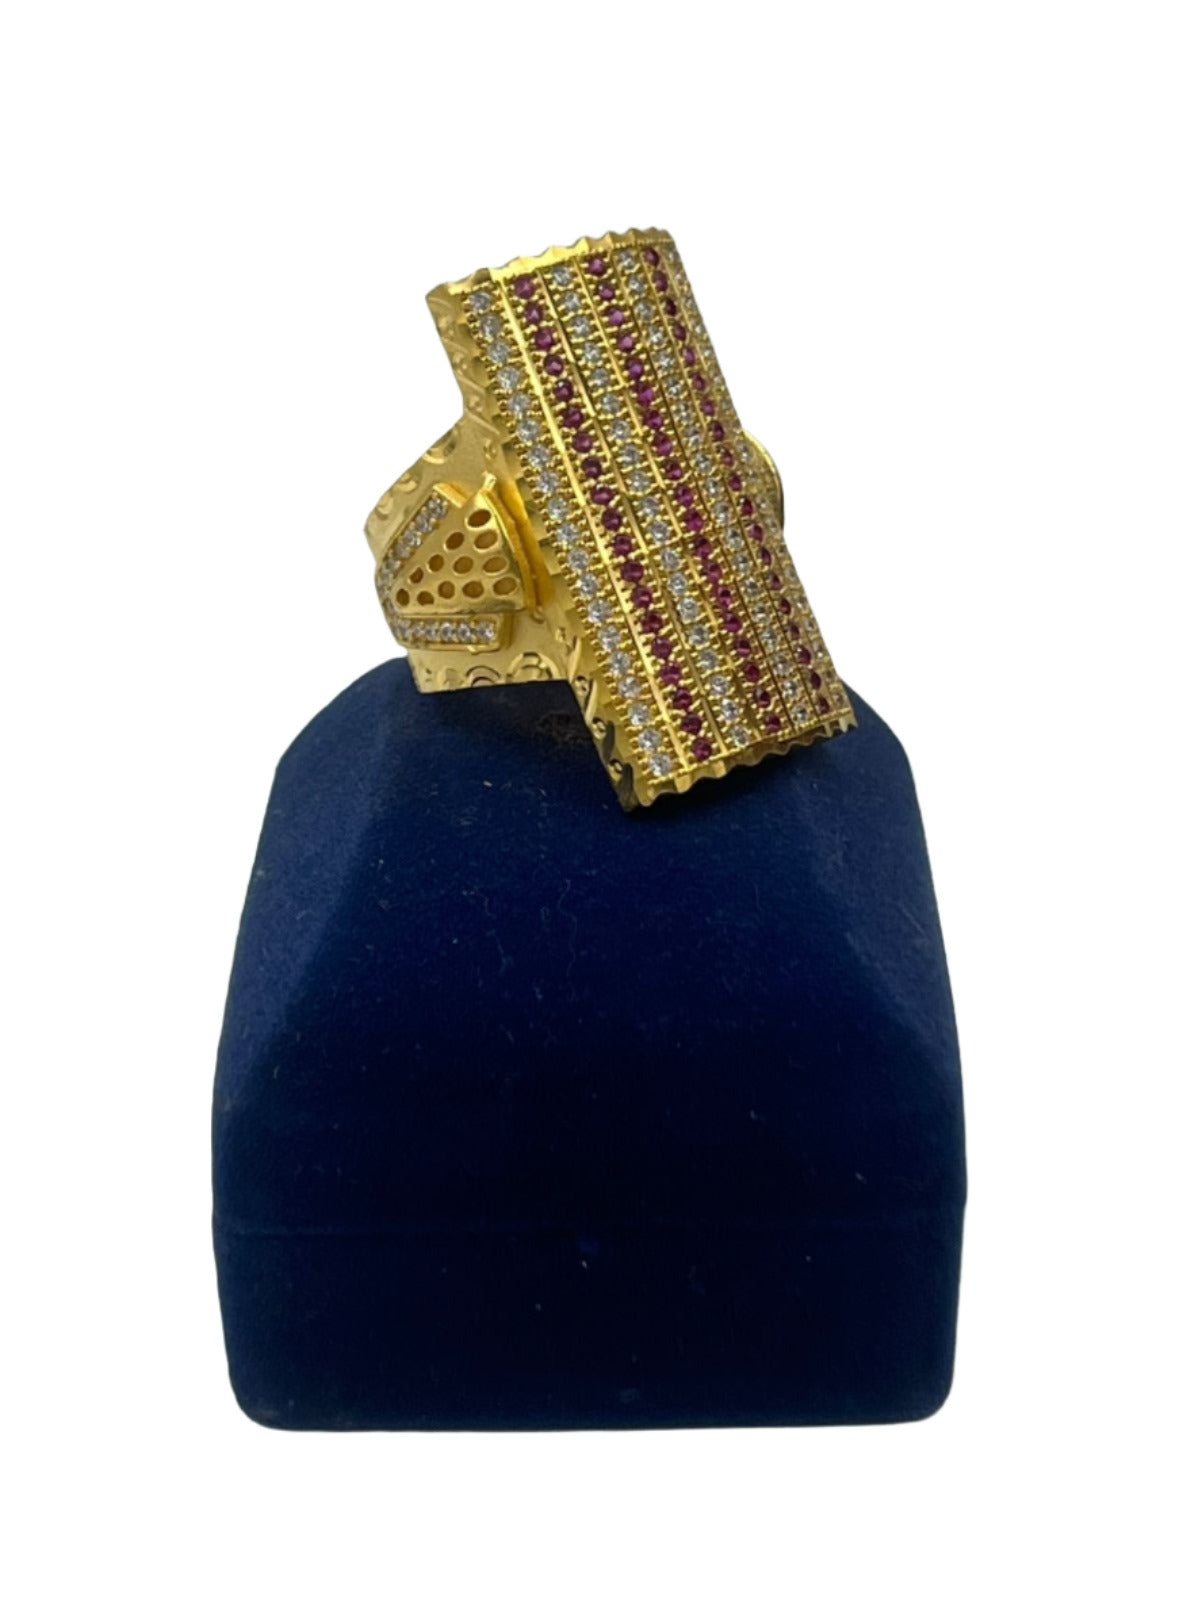 22K Gold 'Adjustable' Peacock Ring For Women With Color Stones - 235-GR8196  in 8.900 Grams